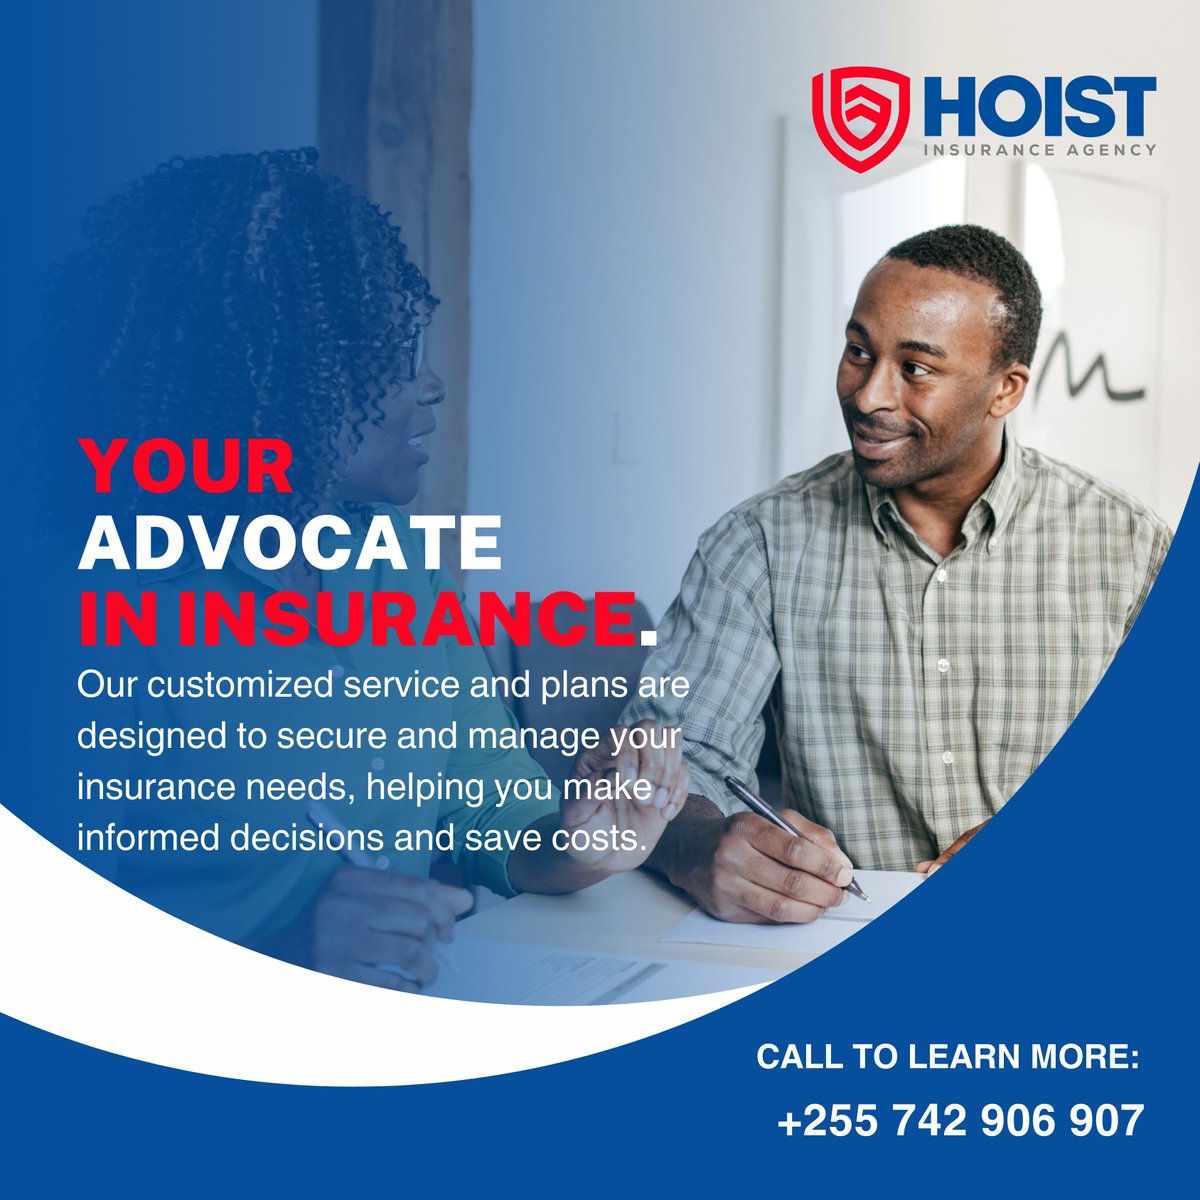 Choose us as your advocate in insurance. Our customized service is designed to manage your needs and save costs. #InsuranceAdvocate #CostSavings